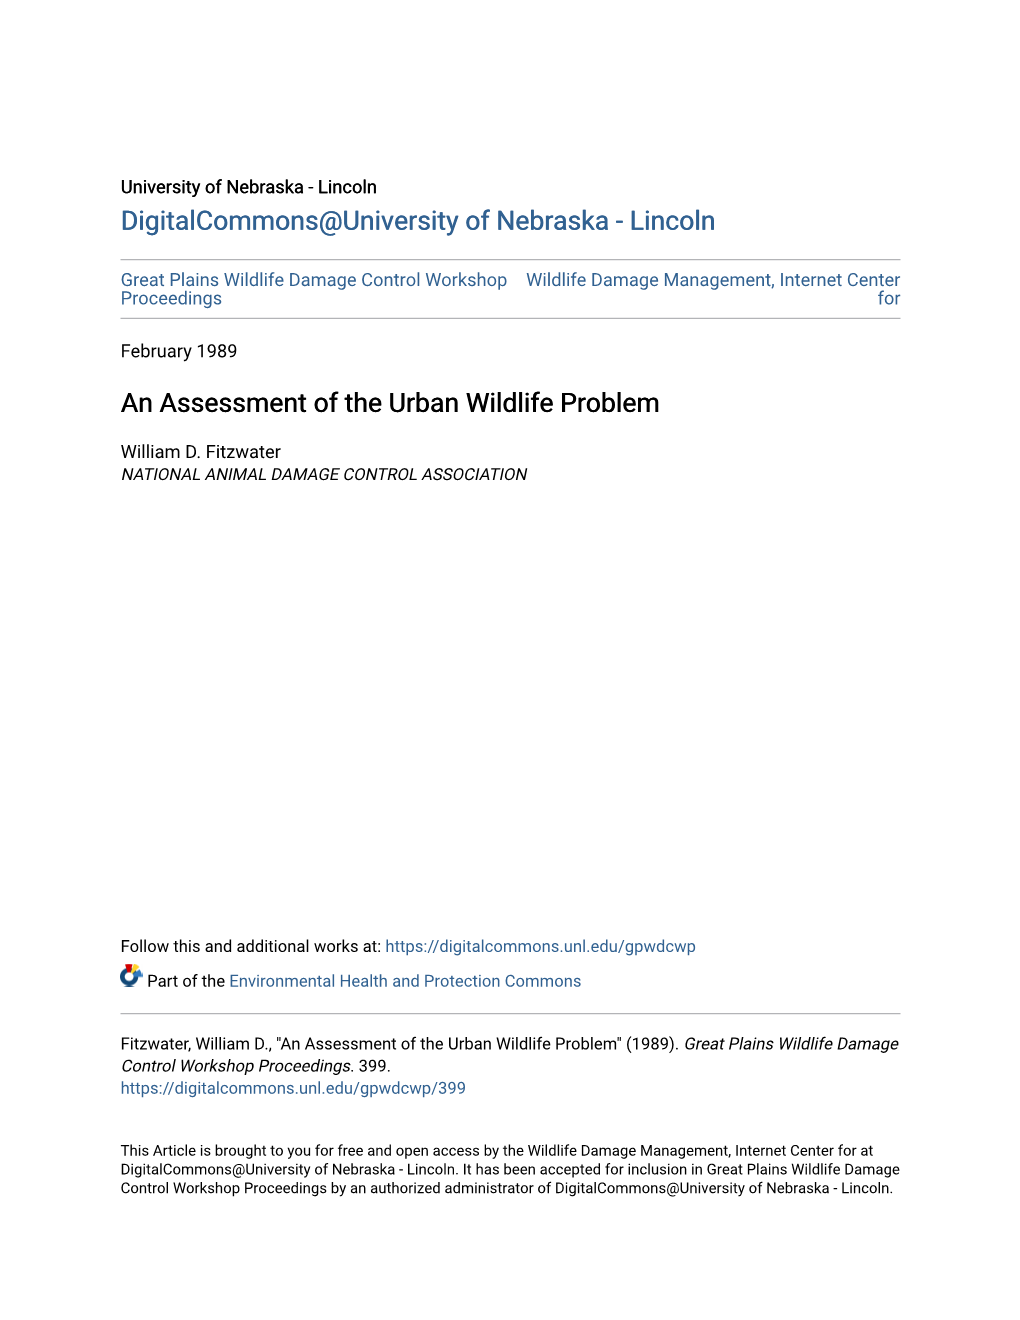 An Assessment of the Urban Wildlife Problem